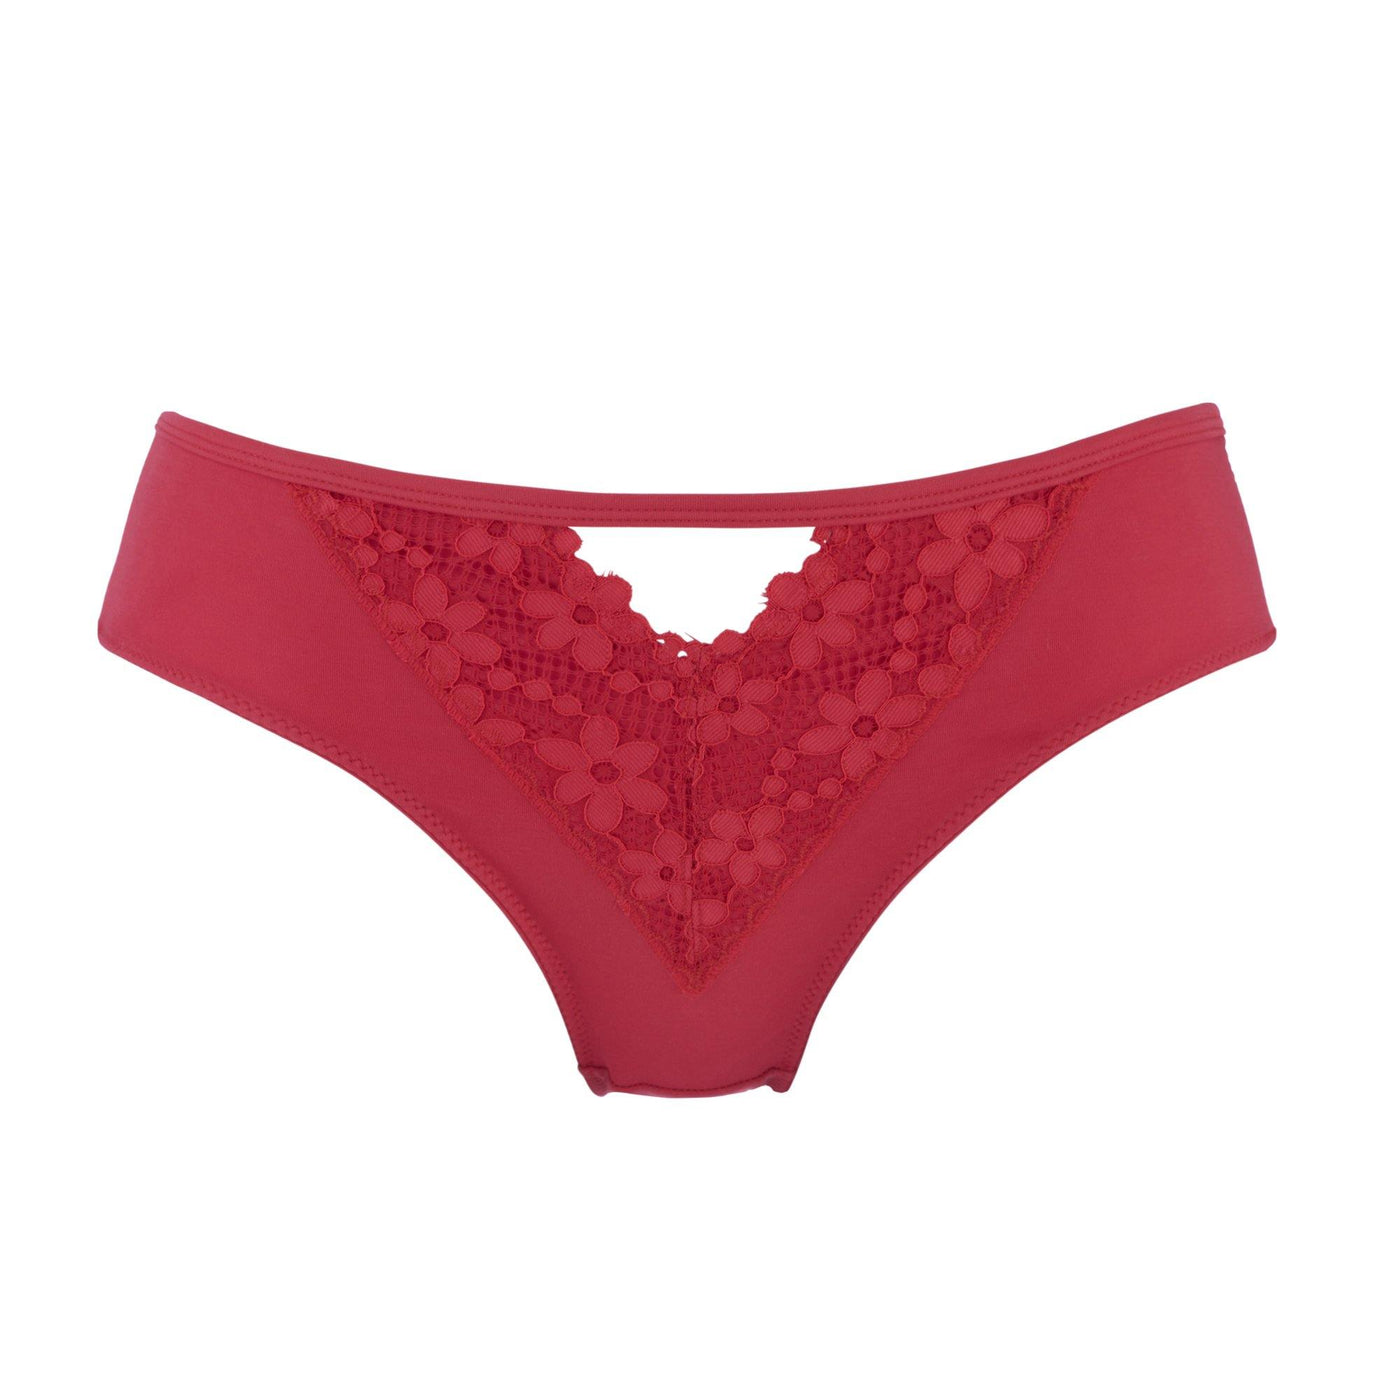 Passion Red - Silk & Organic Cotton Brief - Juliemay Lingerie